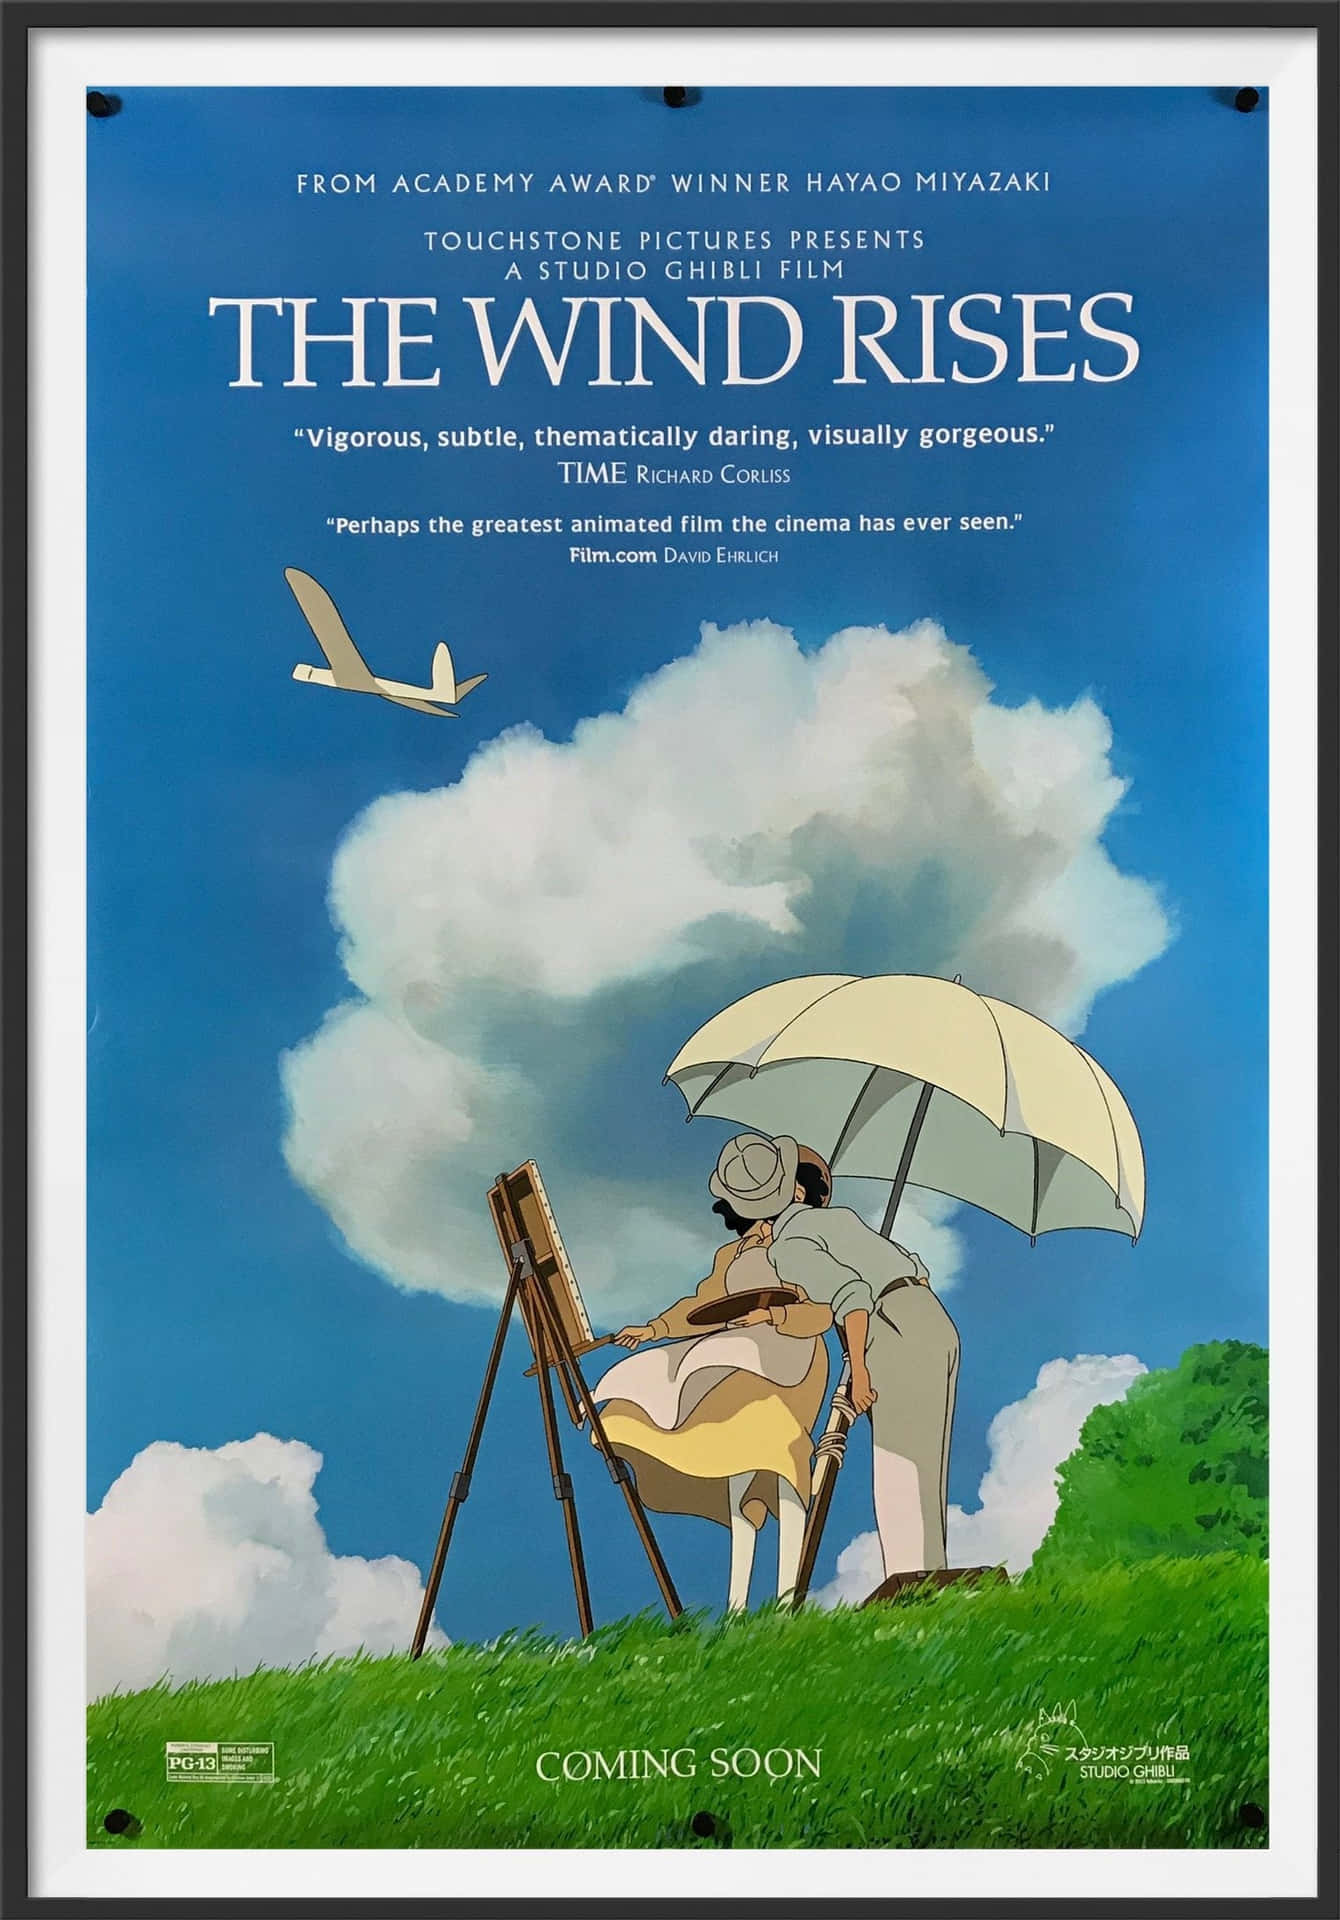 A lonely passenger takes to the sky in The Wind Rises. Wallpaper